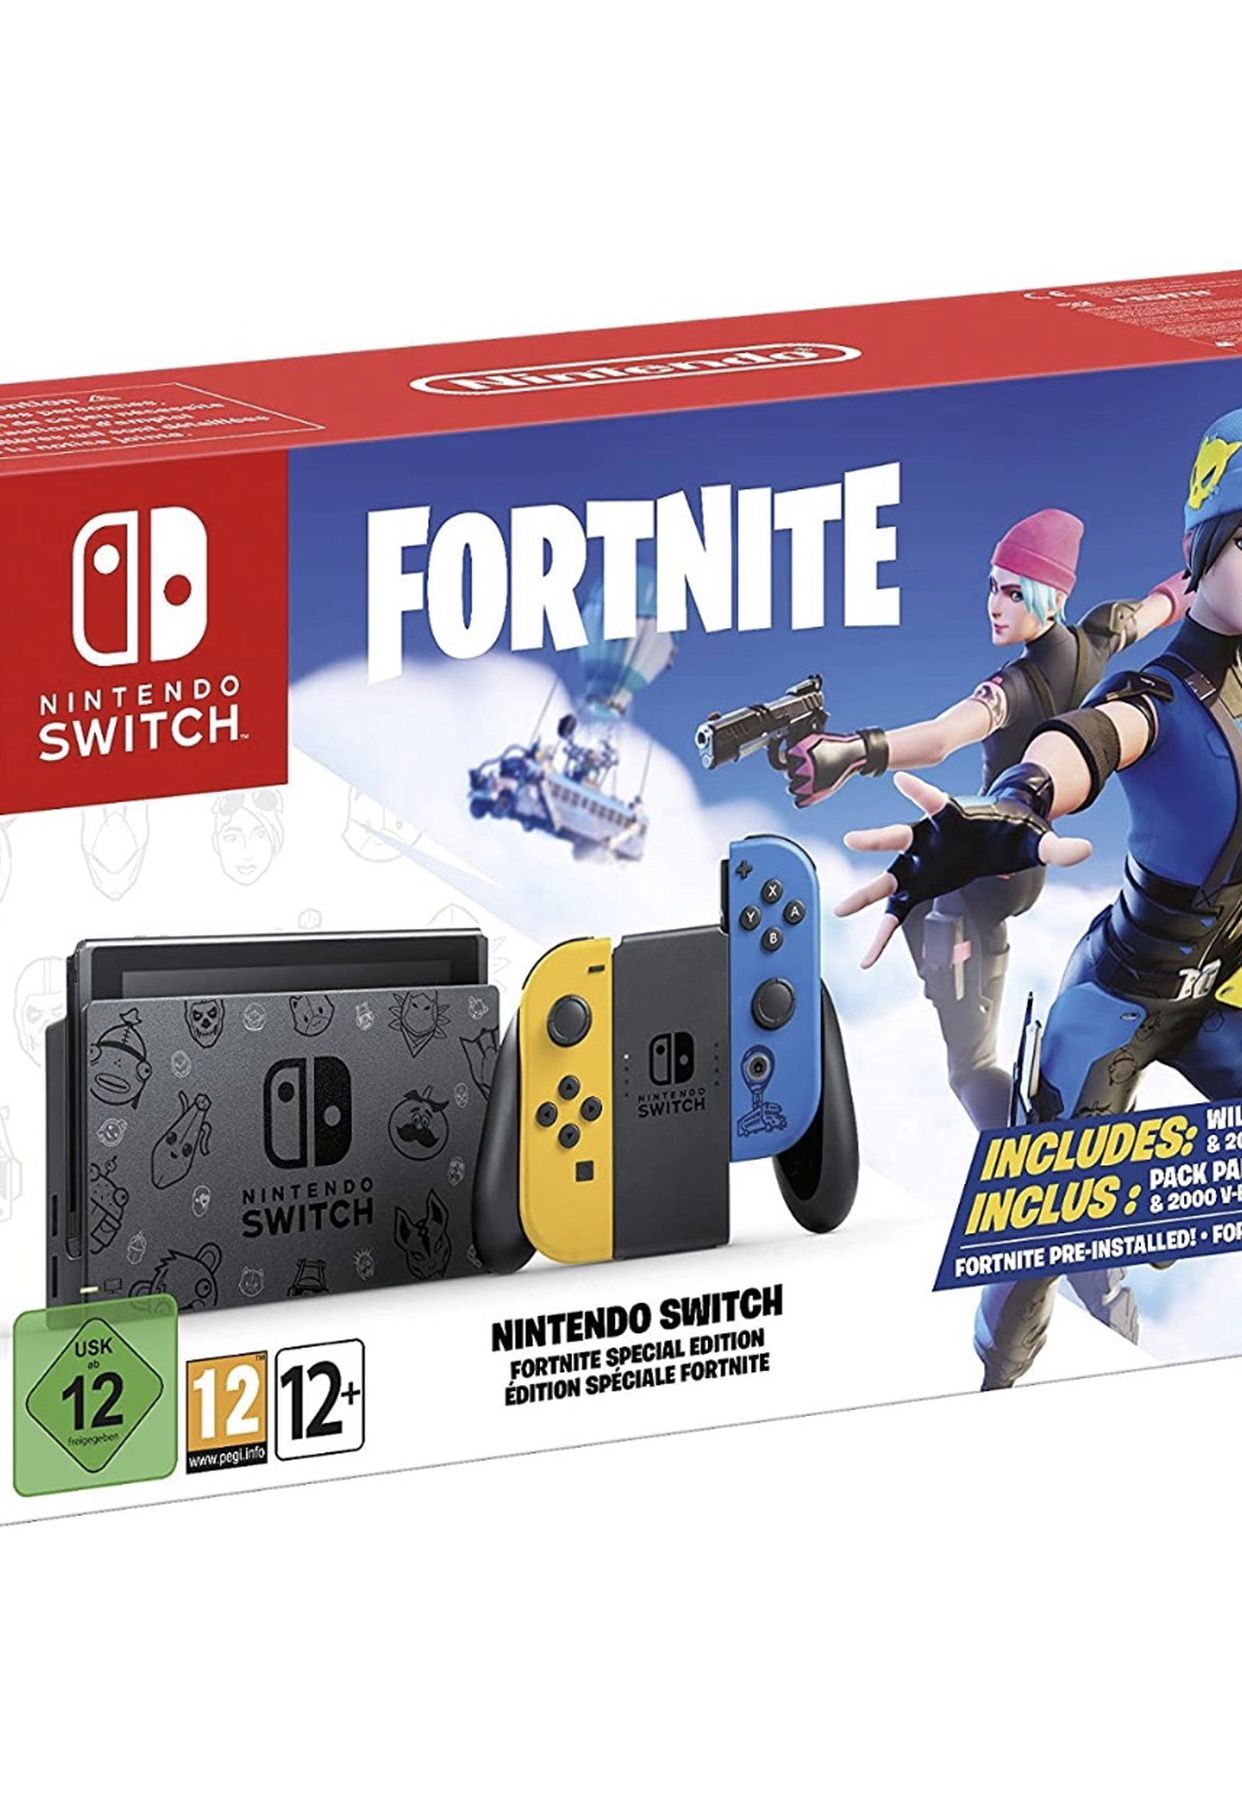 Nintendo Switch Rare Fortnite Edition With Code